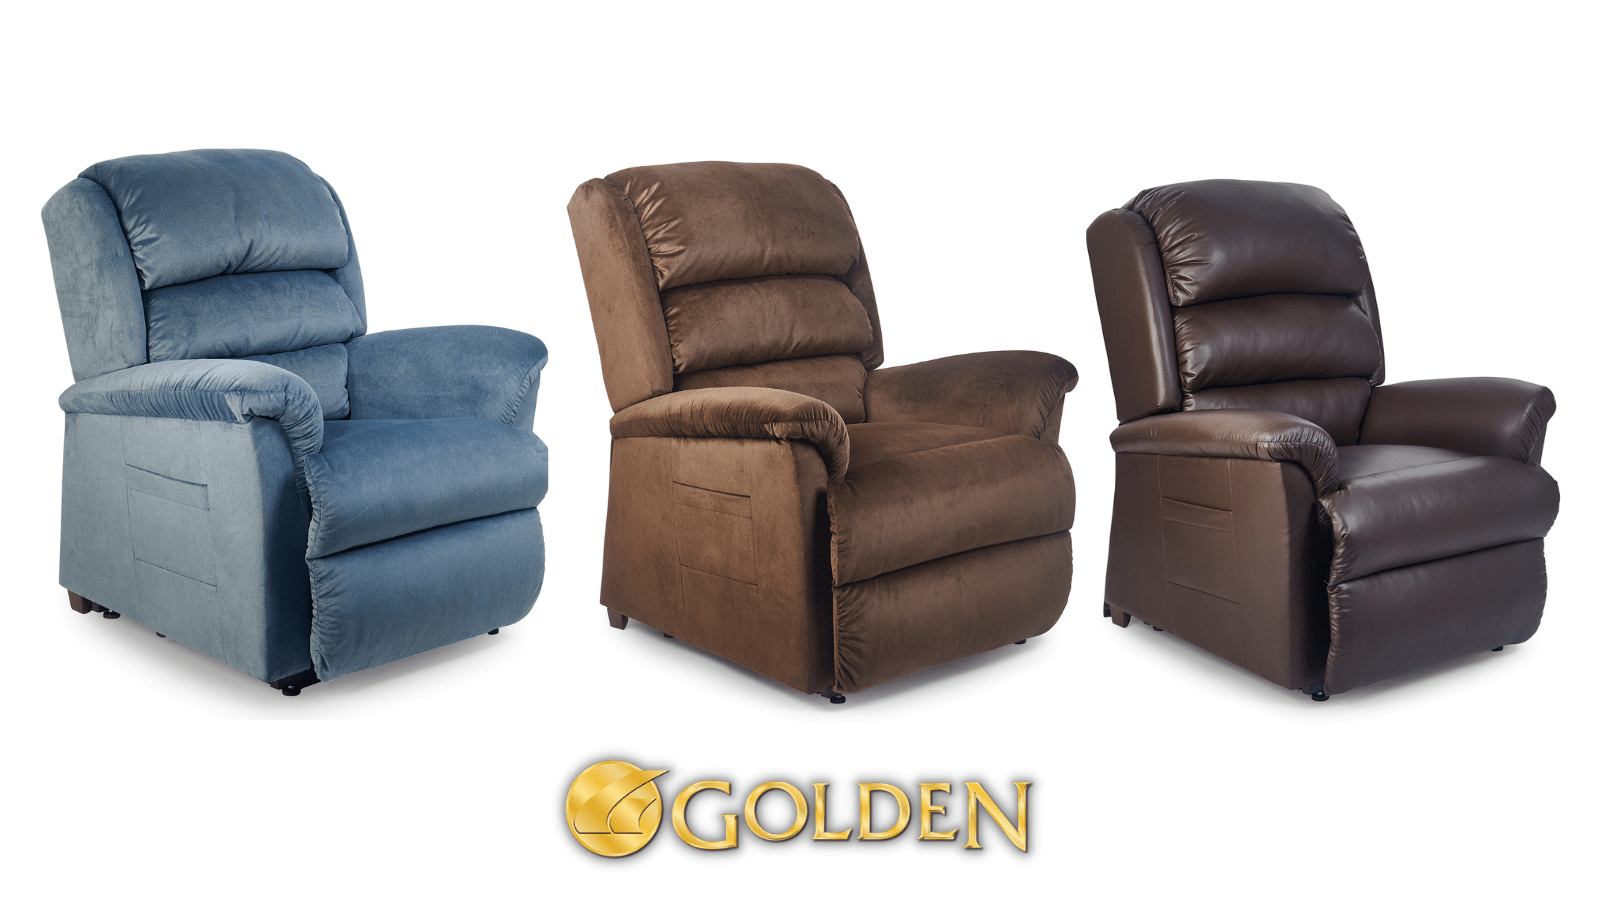 Golden Offers Fastest Lead Times for Lift Recliners & Adds Models to  Product Line - Golden Technologies